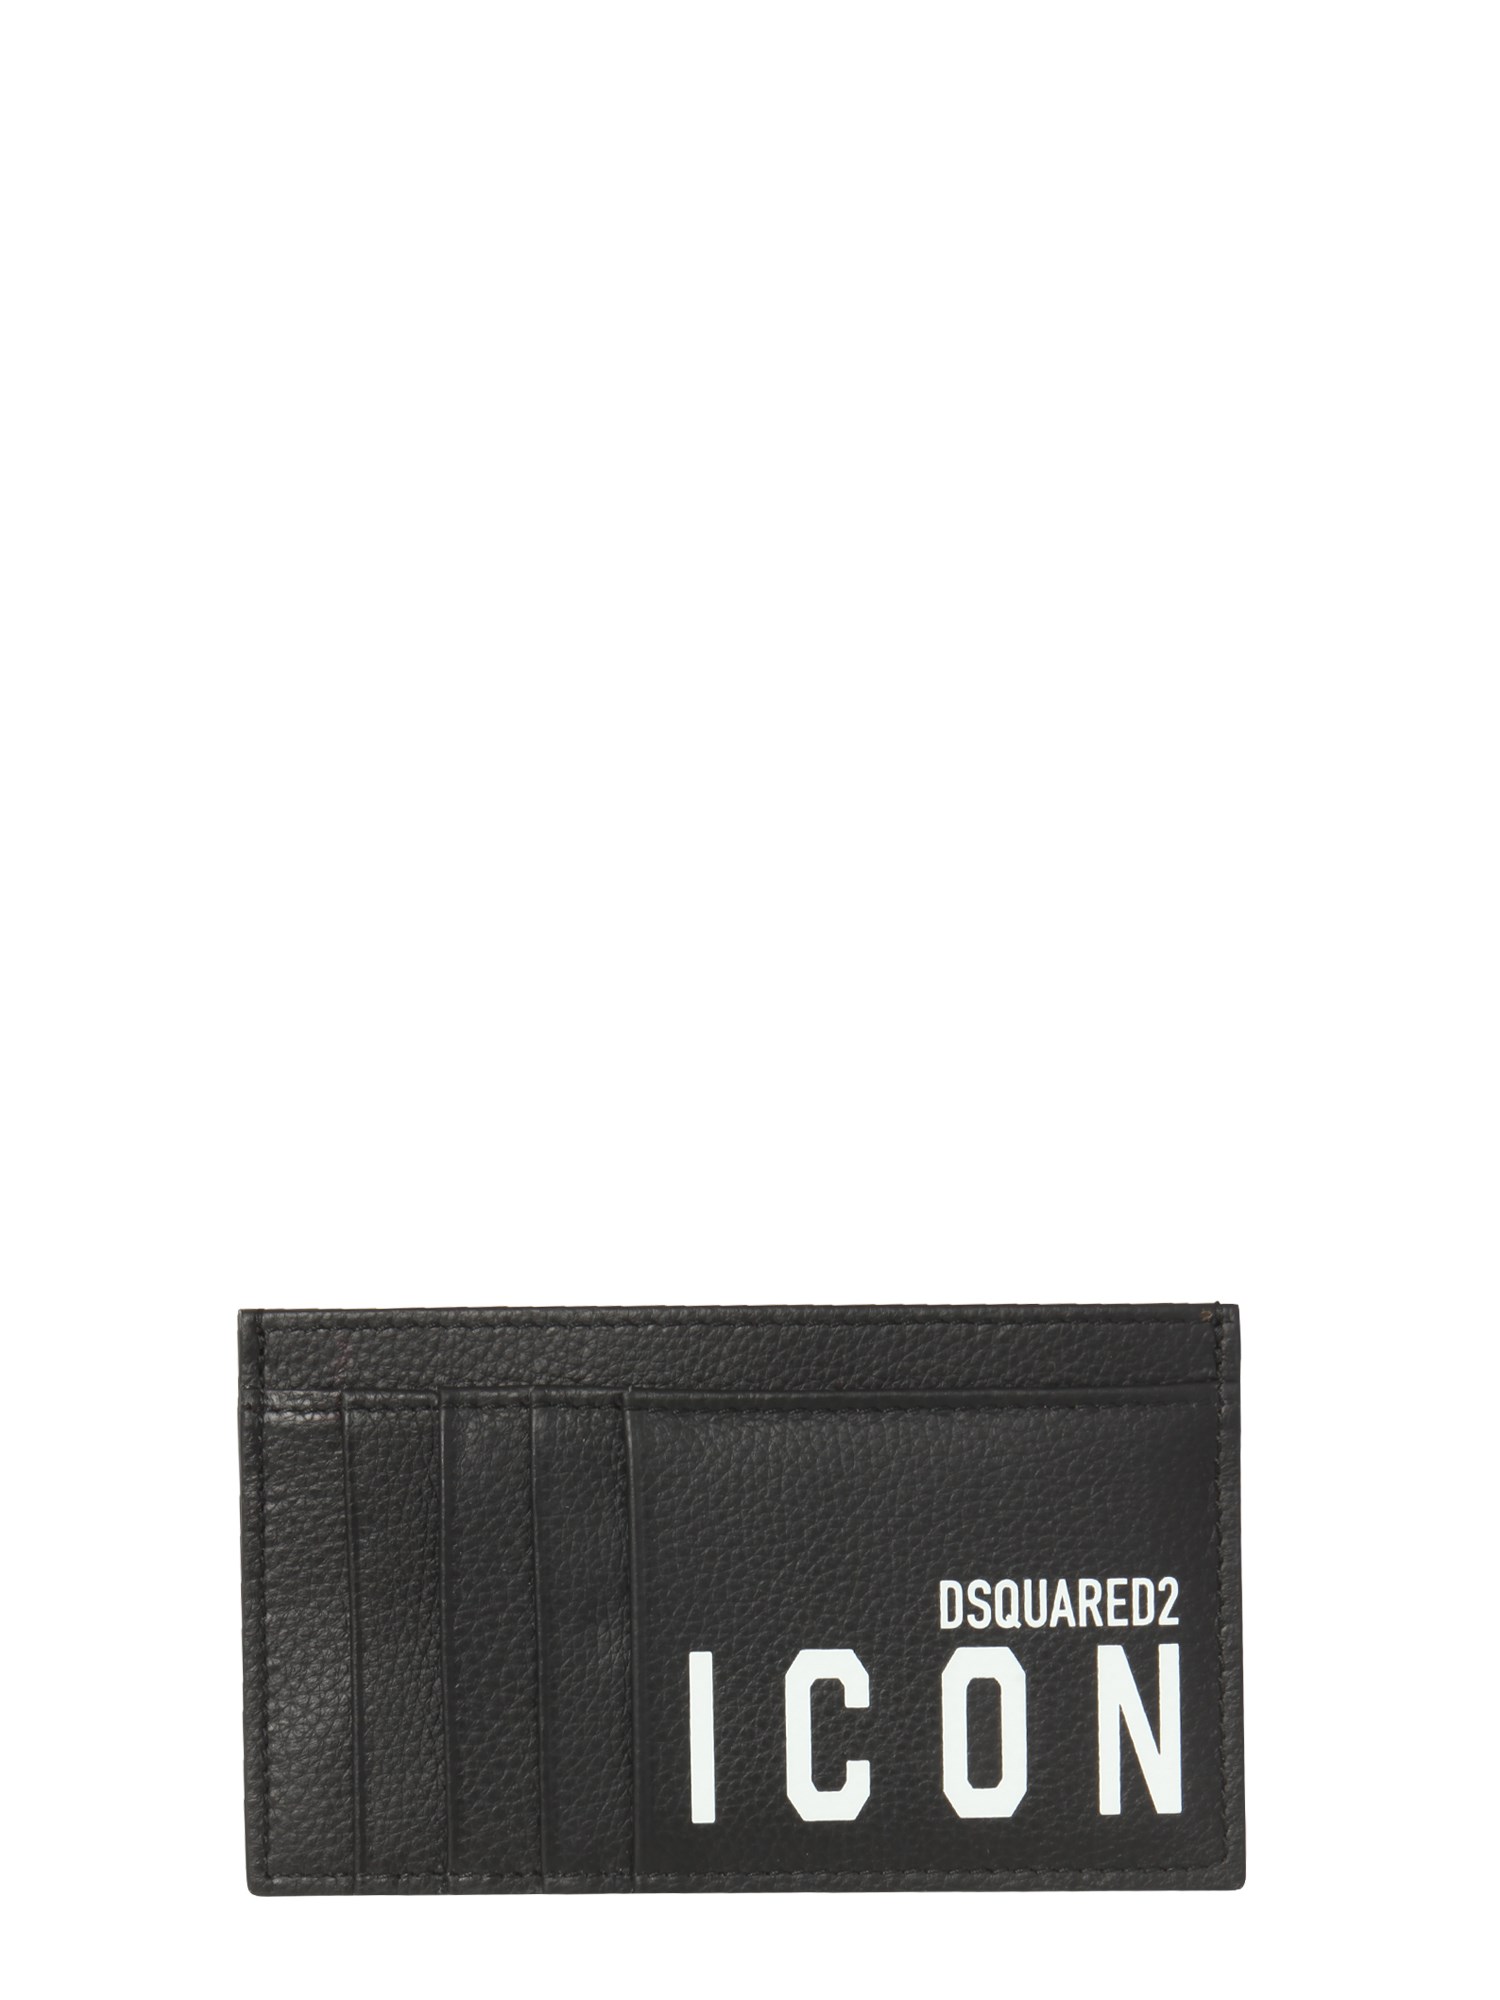 DSQUARED2 ICON CARD HOLDER,199147